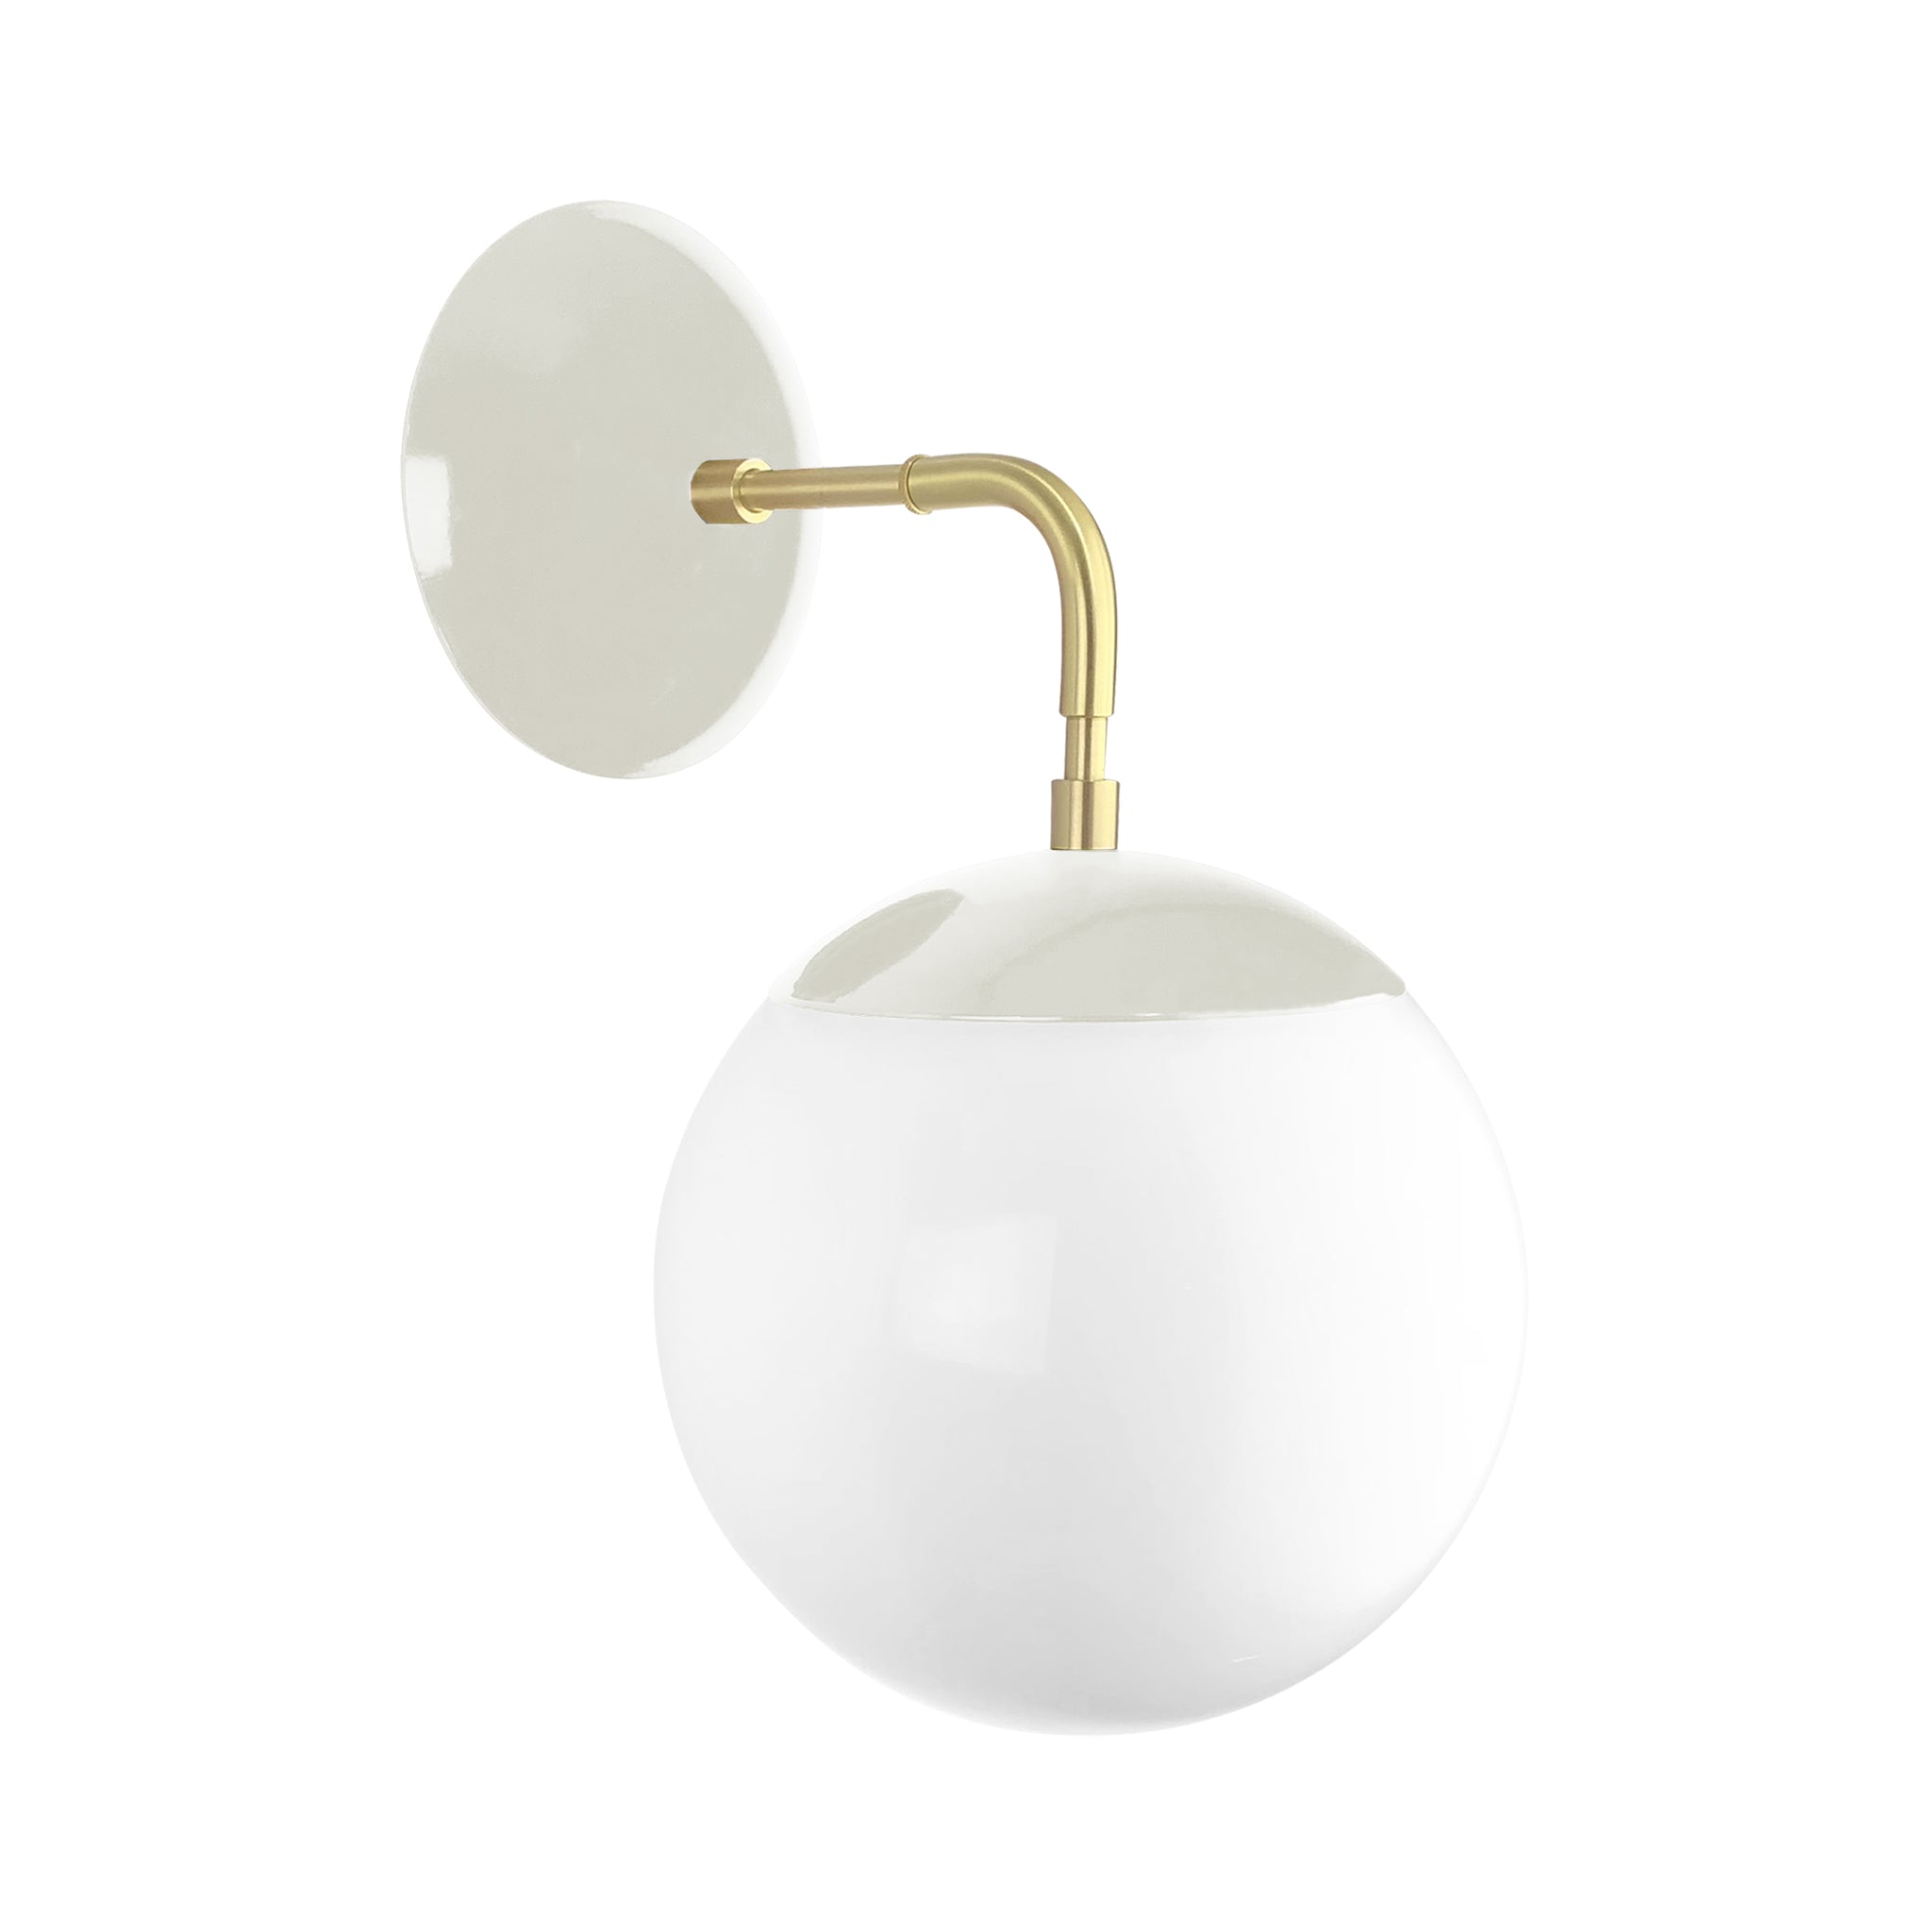 Brass and bone color Cap sconce 8" Dutton Brown lighting